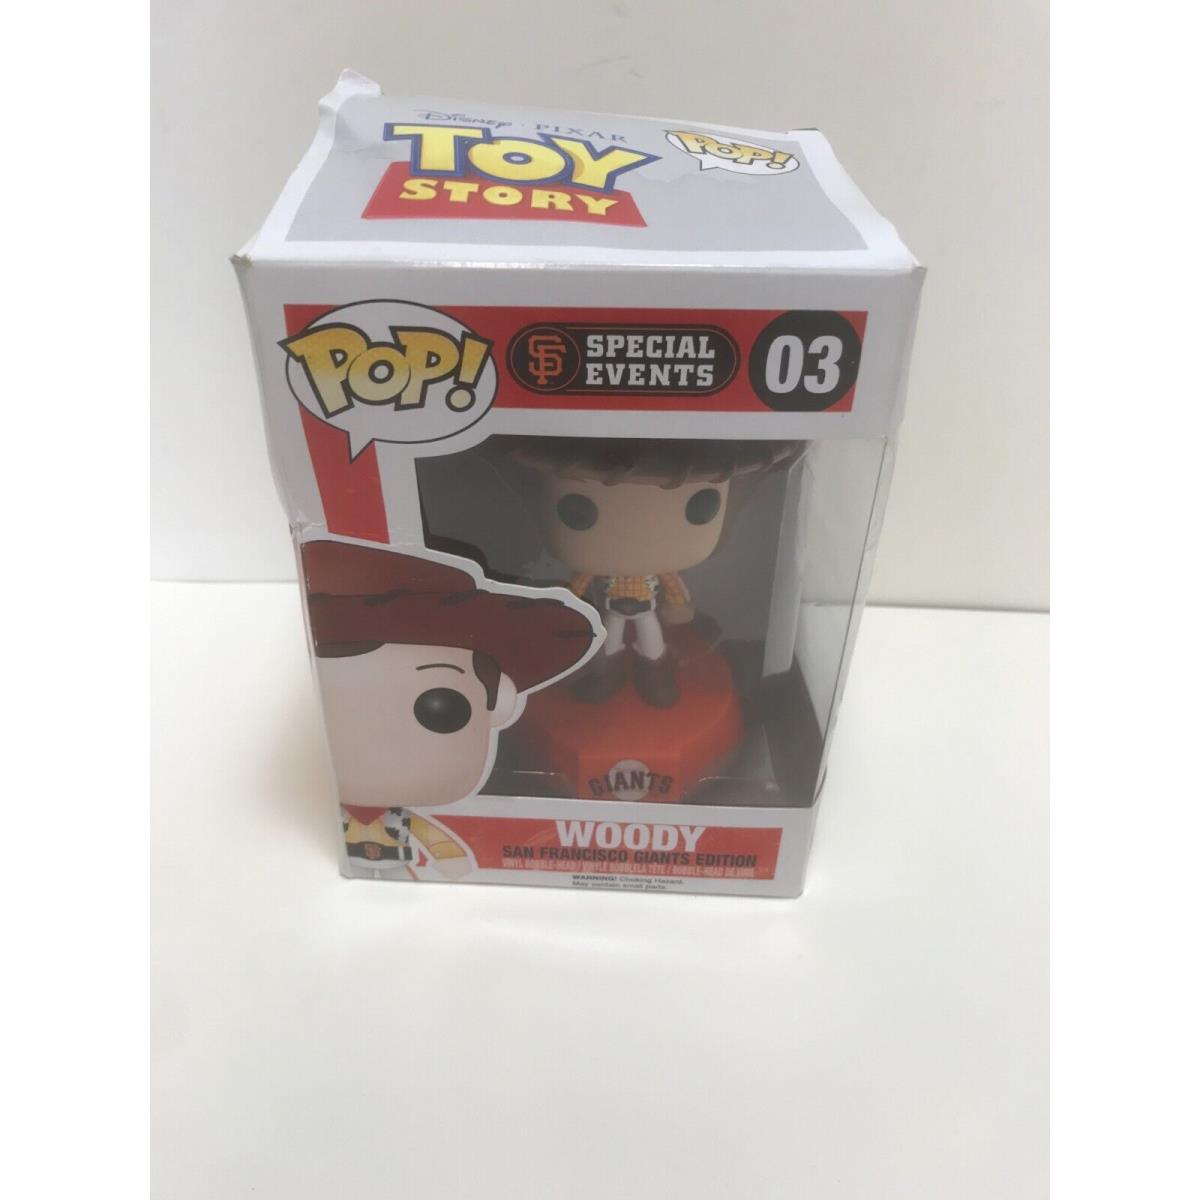 Funko Pop Toy Story Woody SF Giants Edition Special Events 2014 03 See Images